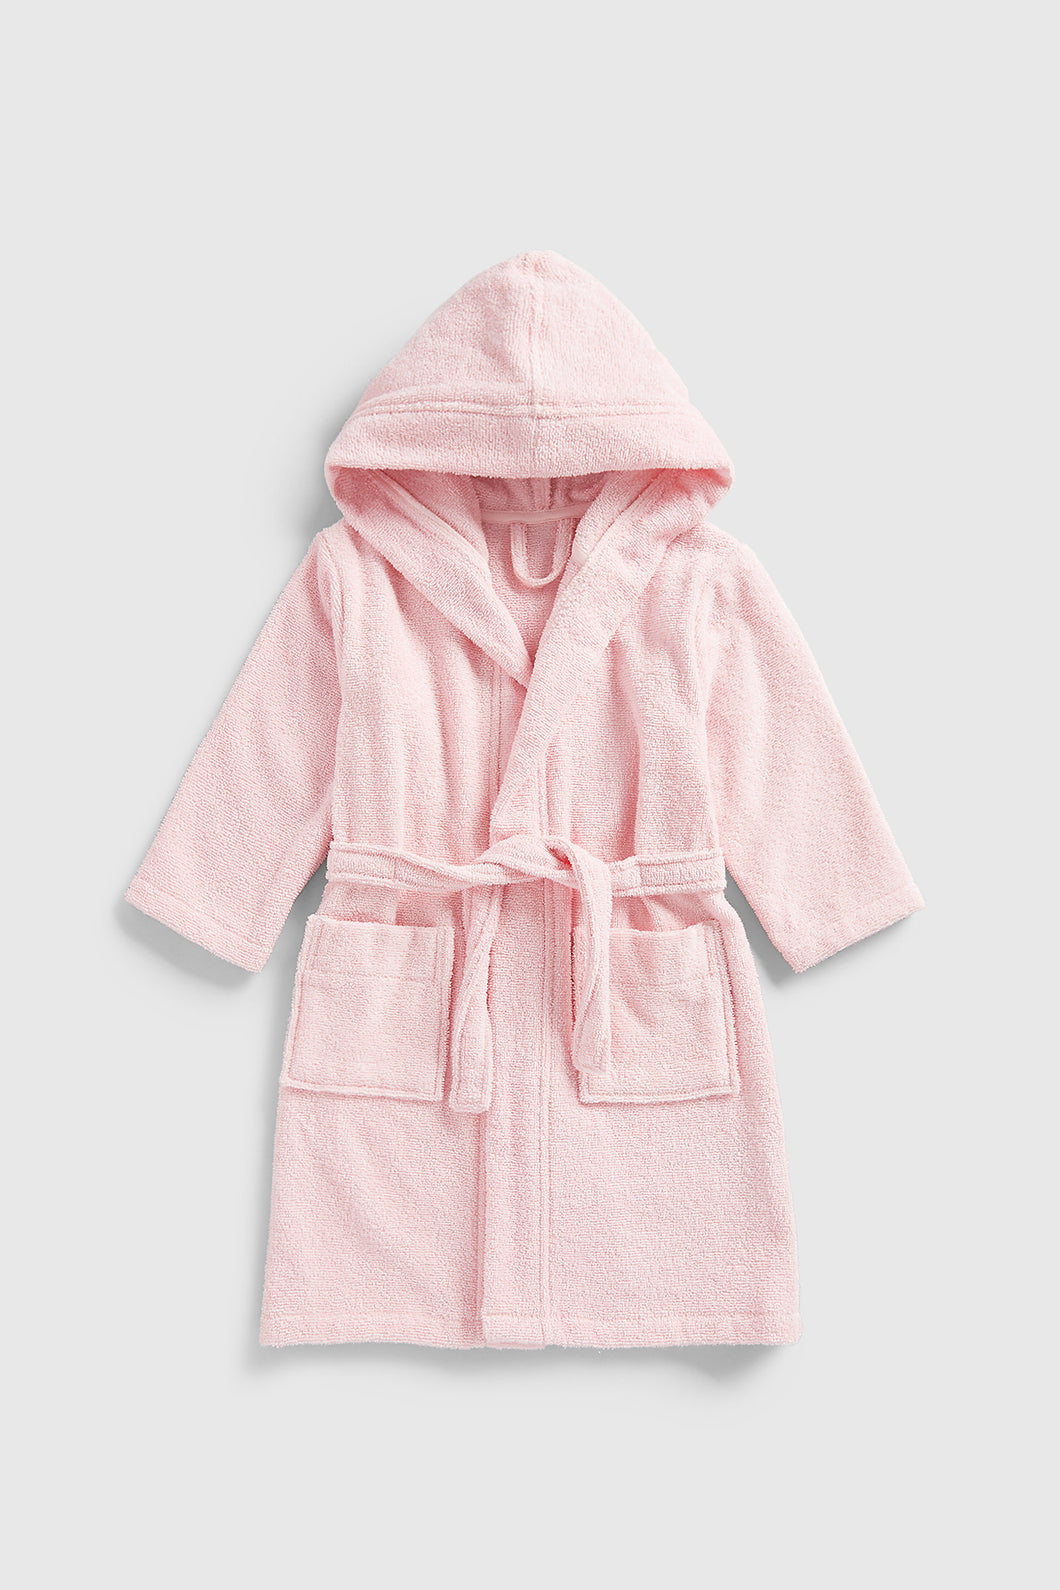 Mothercare Pink Towelling Hooded Robe